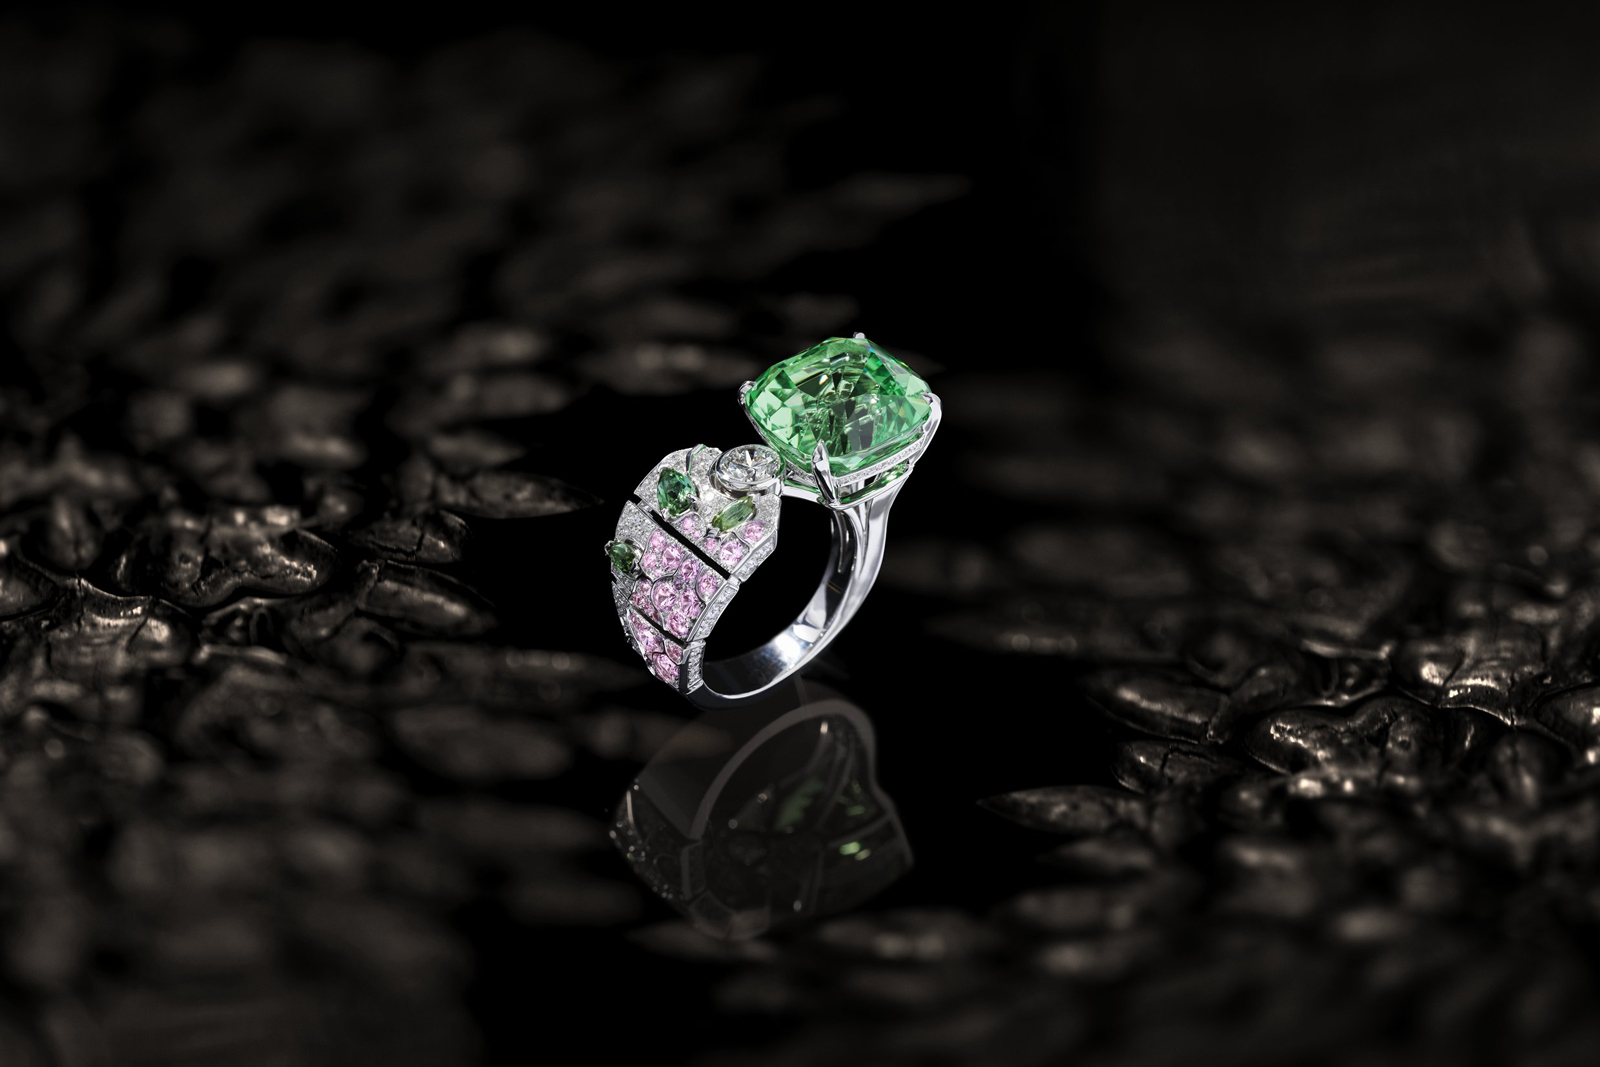 Chanel 'Bague Evocation Florale' ring from the 'Coromandel' collection with 12.05ct mint tsavorite, pink sapphires, diamonds and tourmalines  